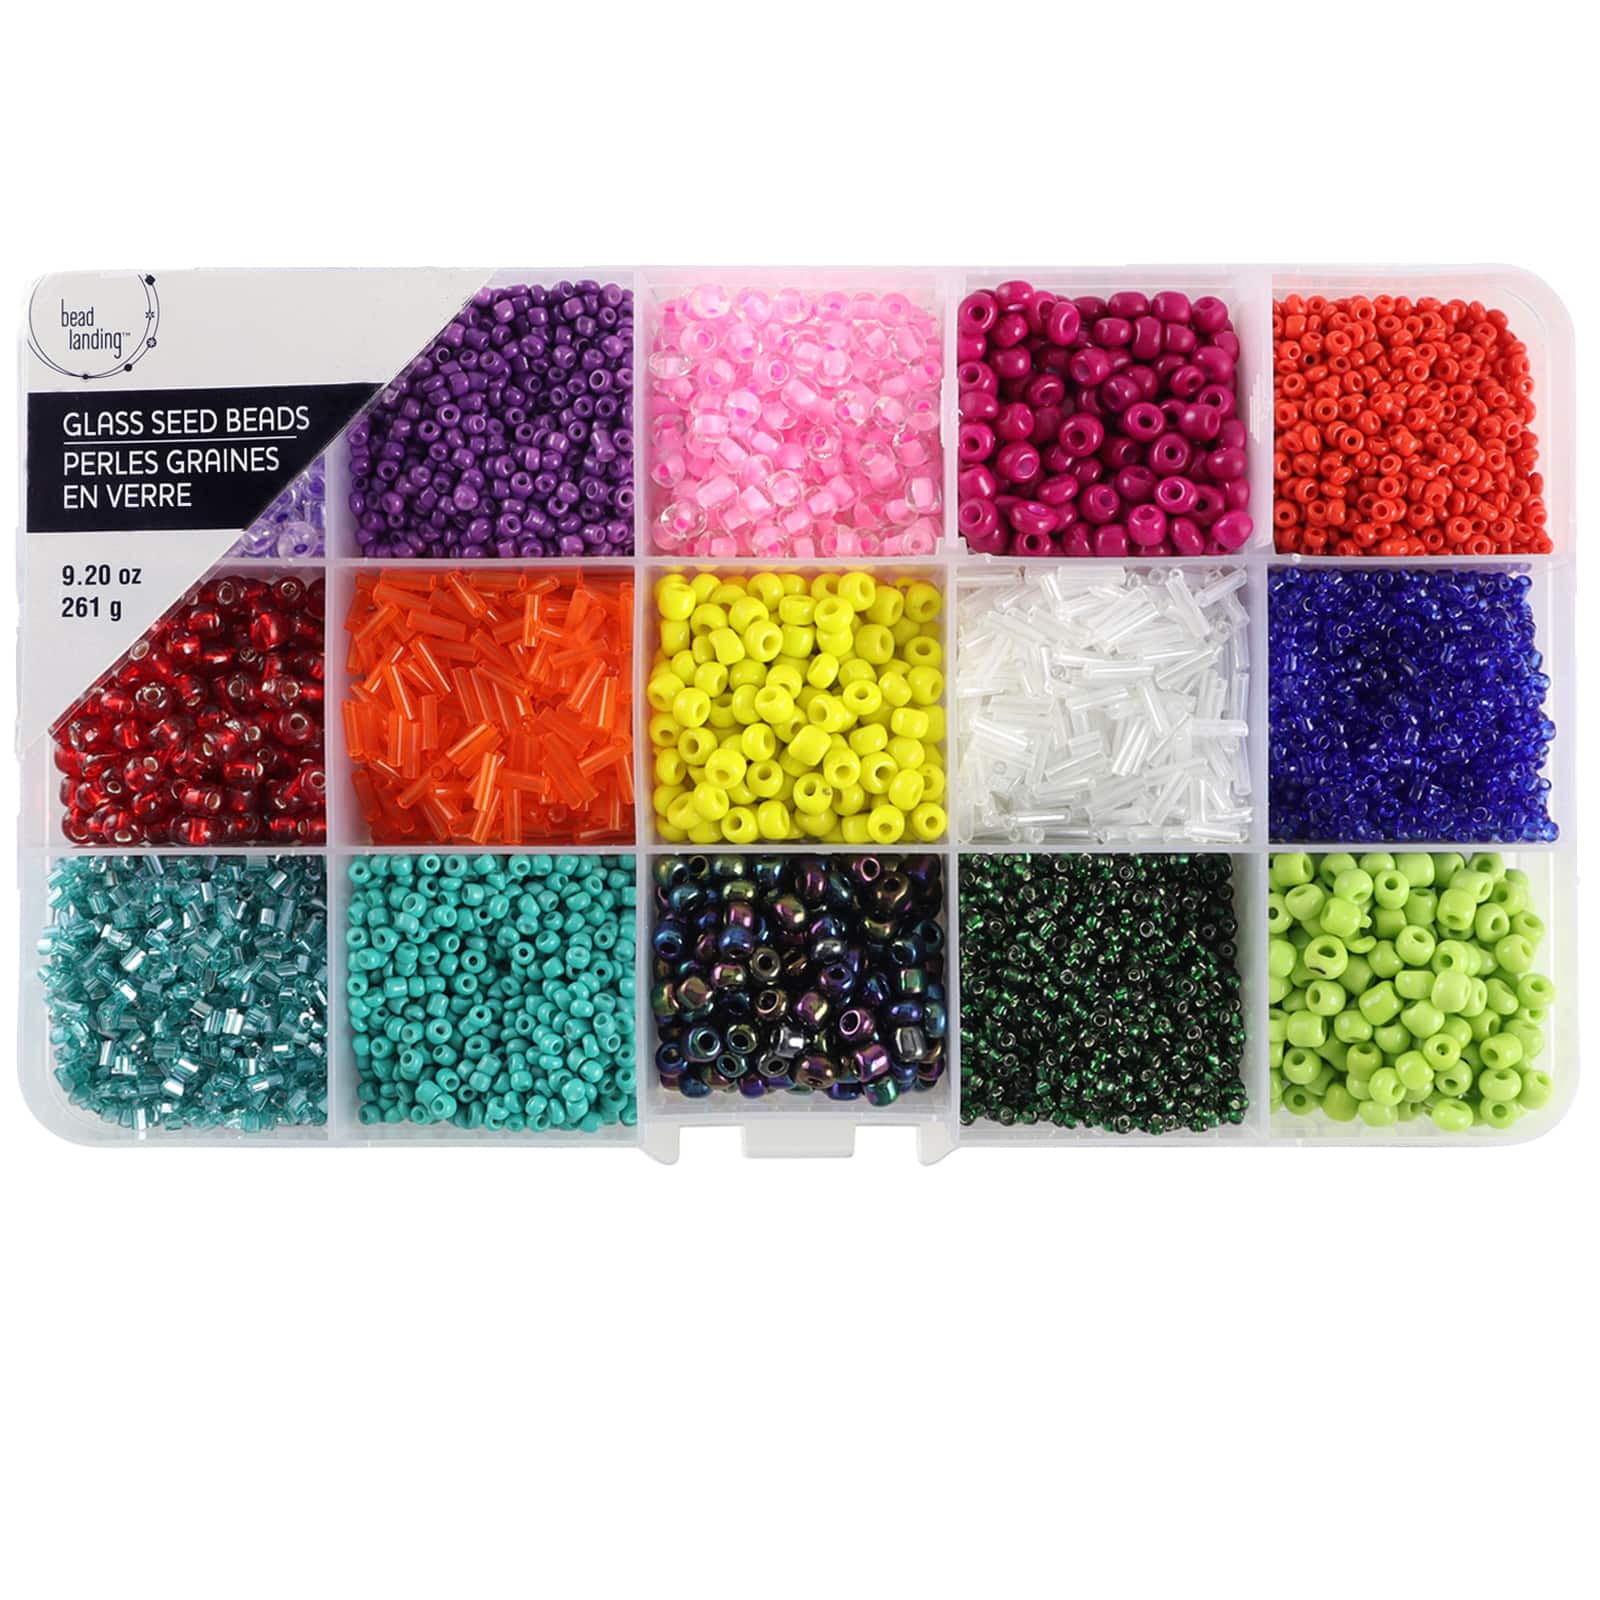 Rainbow Colored Beads Art: Canvas Prints, Frames & Posters